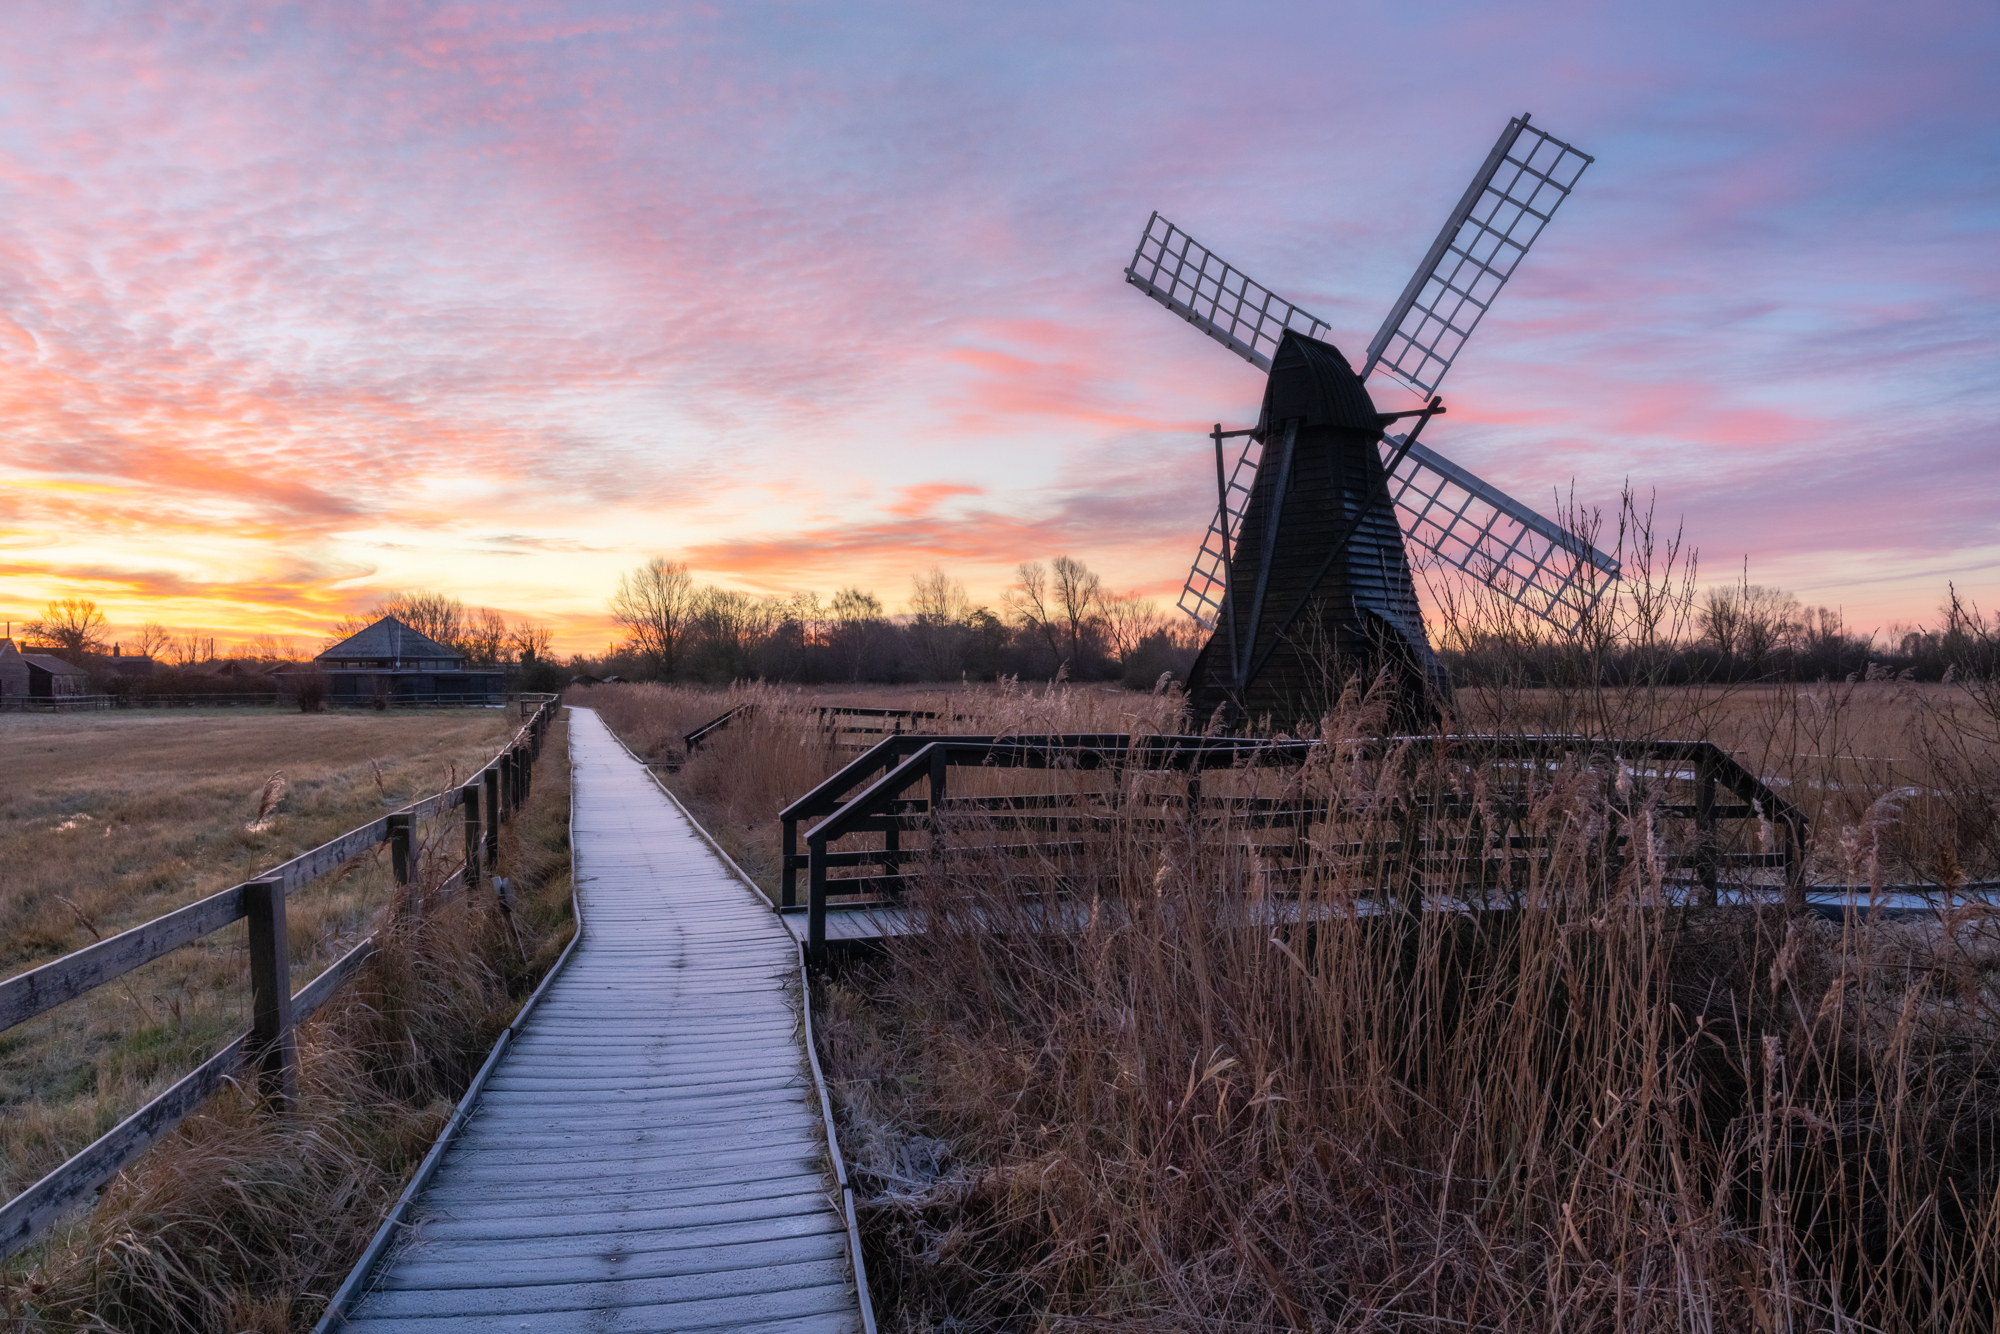 HDR bracketed composite at ISO 2500 of a windmill at golden hour